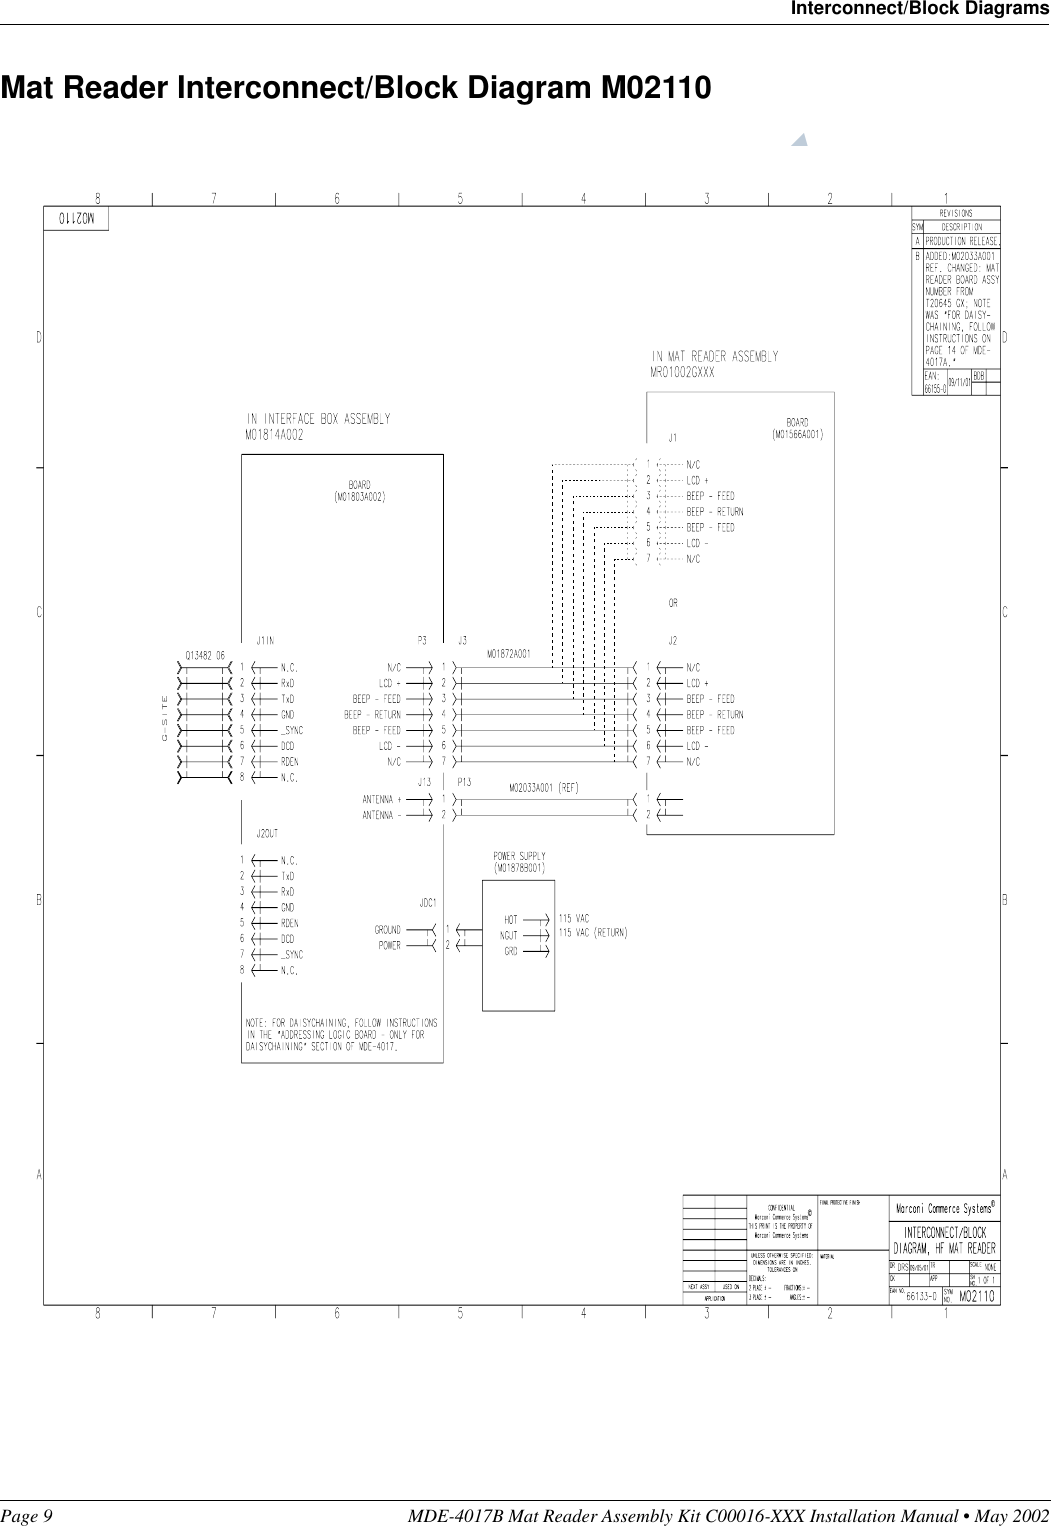 Preliminary  05/16/02Page 9 MDE-4017B Mat Reader Assembly Kit C00016-XXX Installation Manual • May 2002Interconnect/Block DiagramsMat Reader Interconnect/Block Diagram M02110